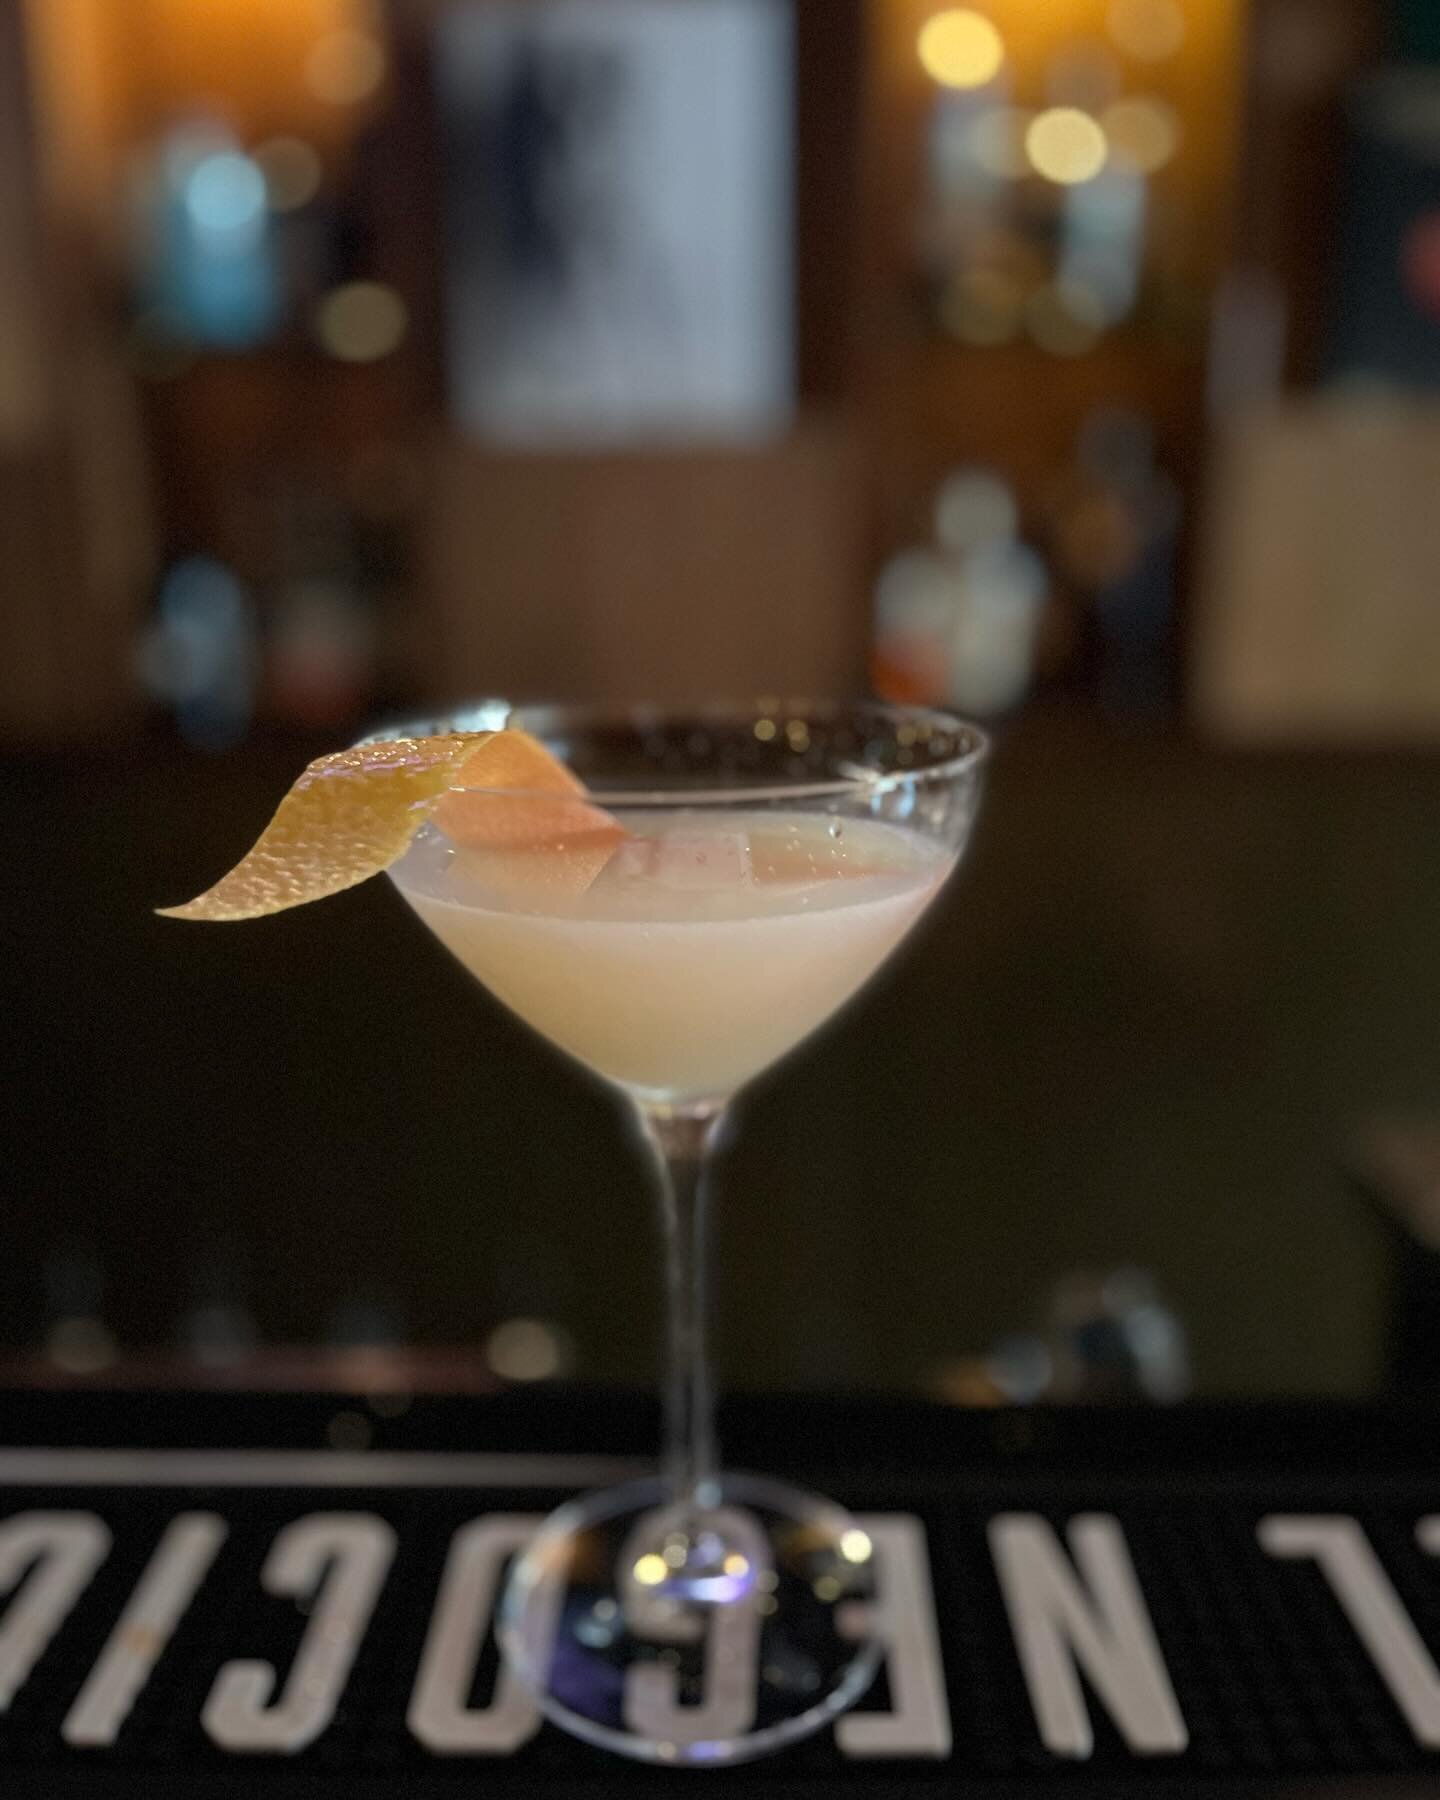 A nutty-creamy, balanced, and botanical classic! 

Come in for an Army &amp; Navy! Featuring house-made orgeat (almond syrup), Fords London Dry Gin, fresh lemon, and Bogart Bitters. 

#manhattanbeach #cocktails #classiccocktails #speakeasy #fun #hous